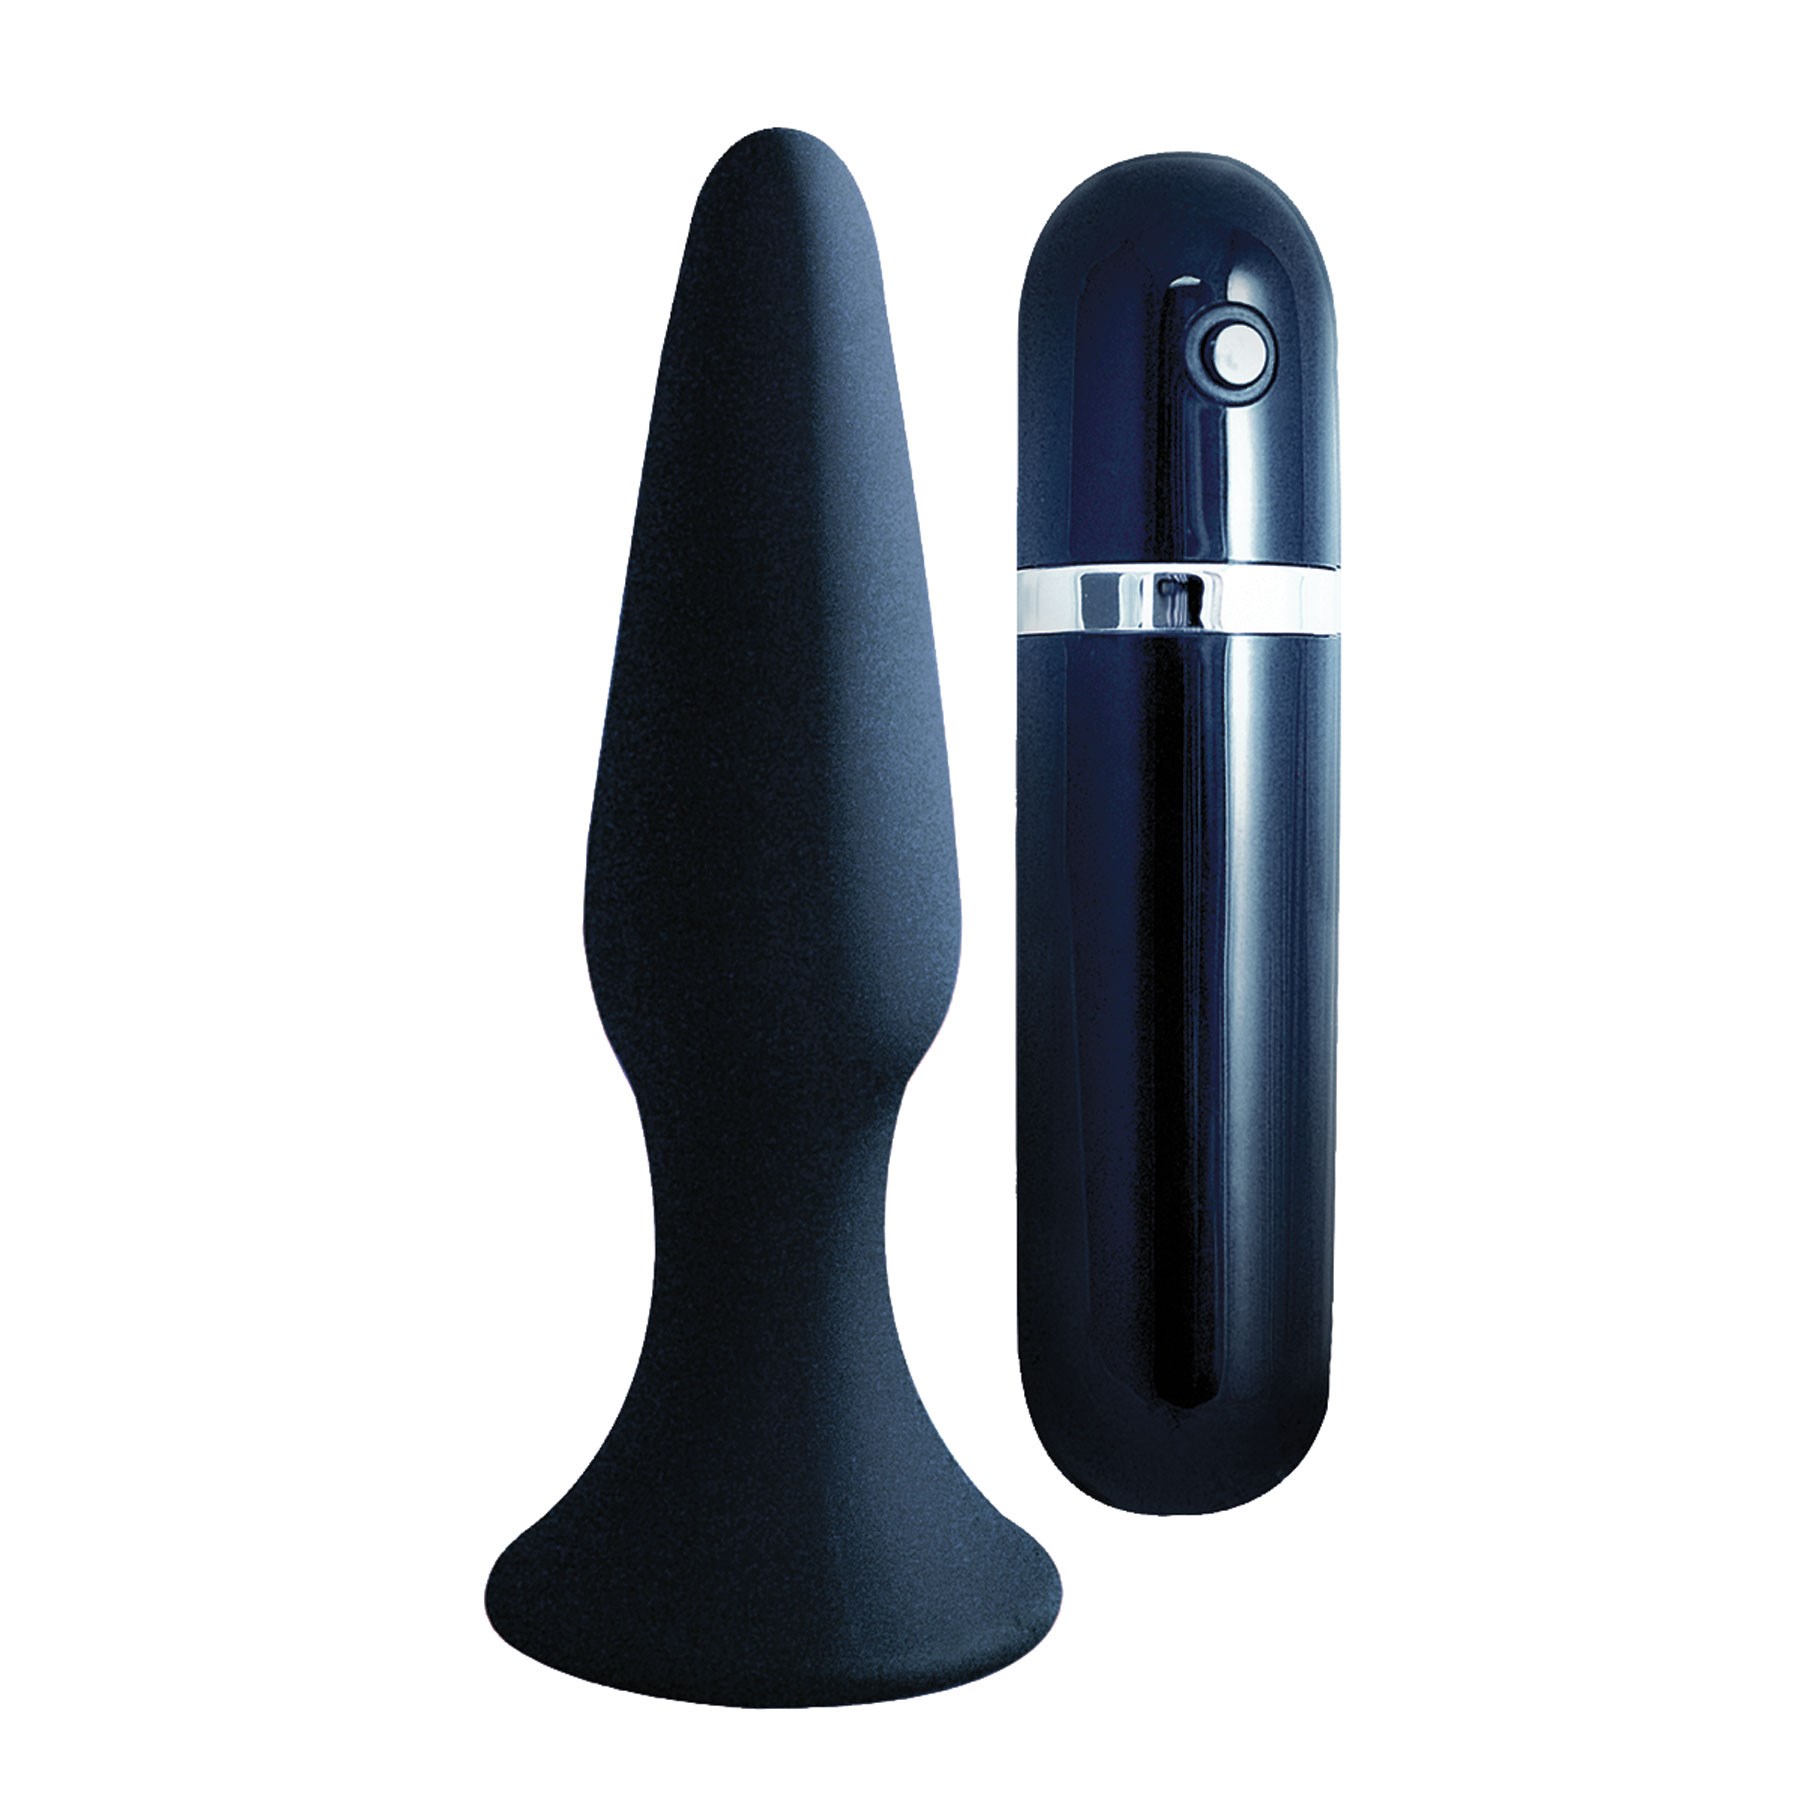 Anal Vibrators for Women in 